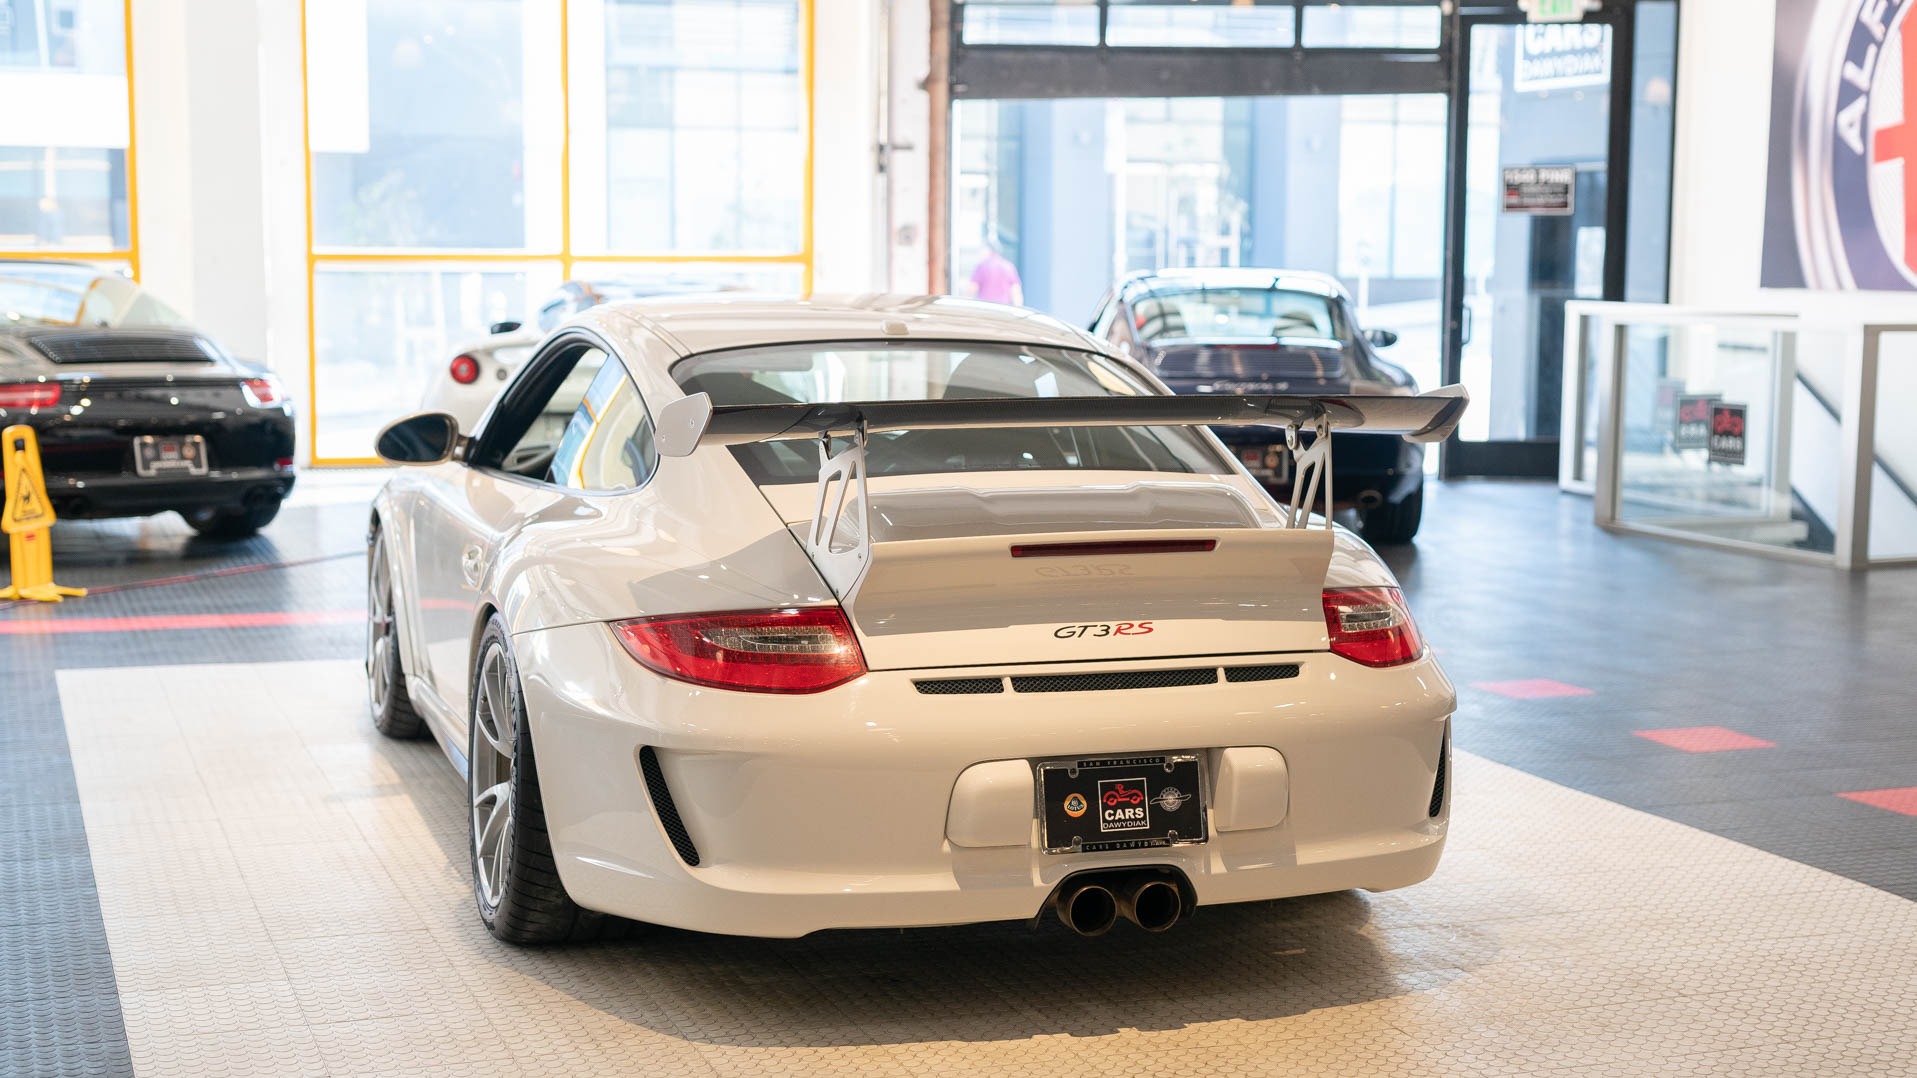 Used 2010 Porsche 911 Gt3 Rs For Sale 149900 Cars